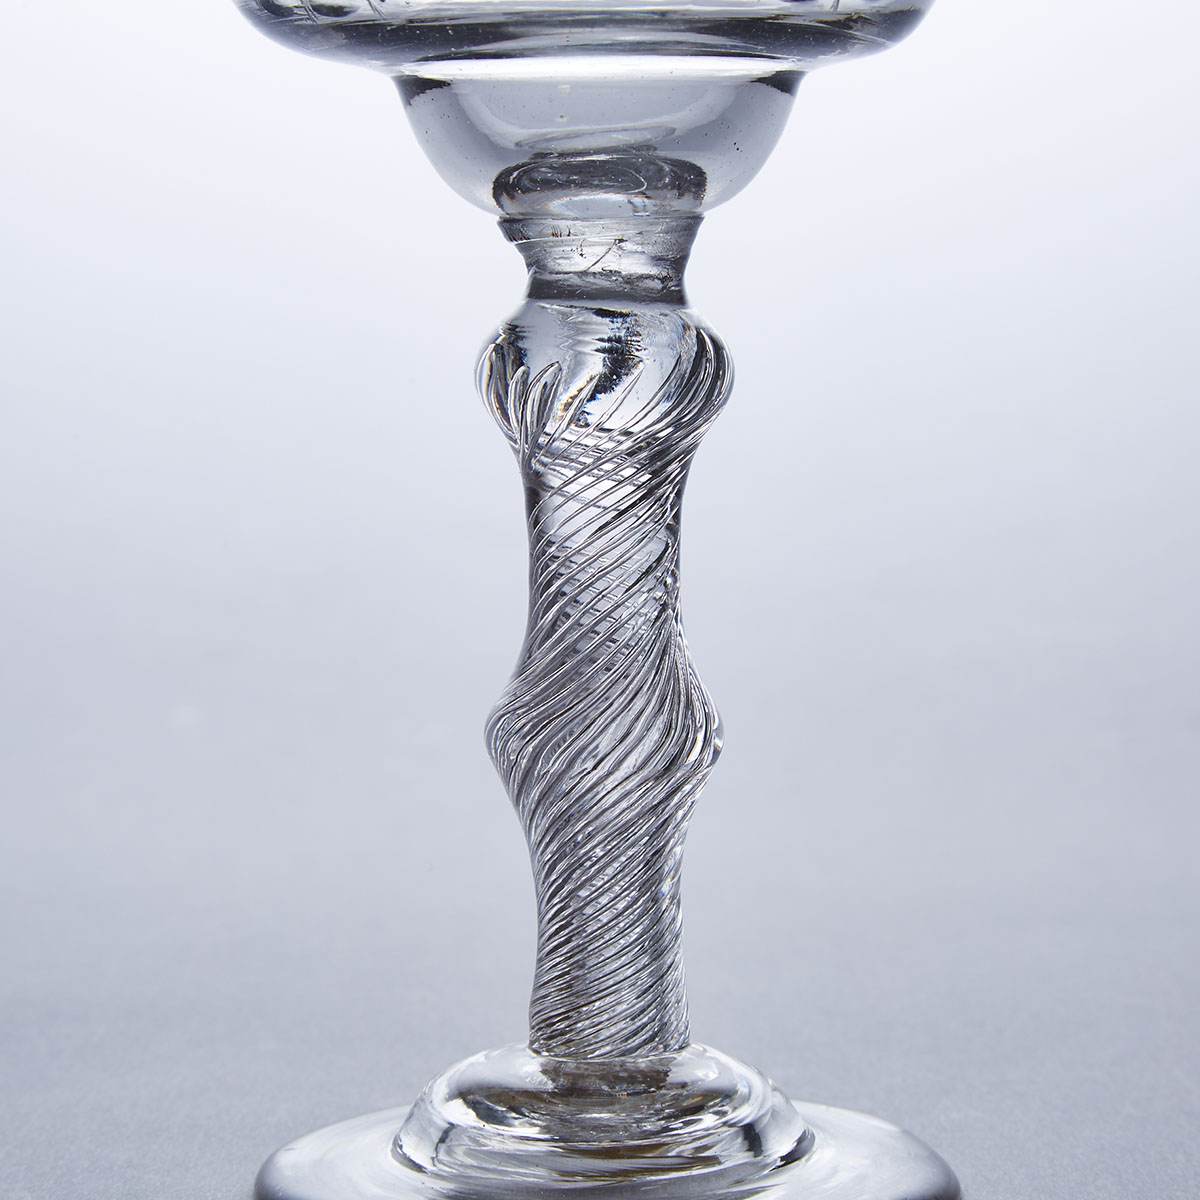 English Engraved Airtwist Stemmed Sweetmeat or Champagne Glass, c.1750-60